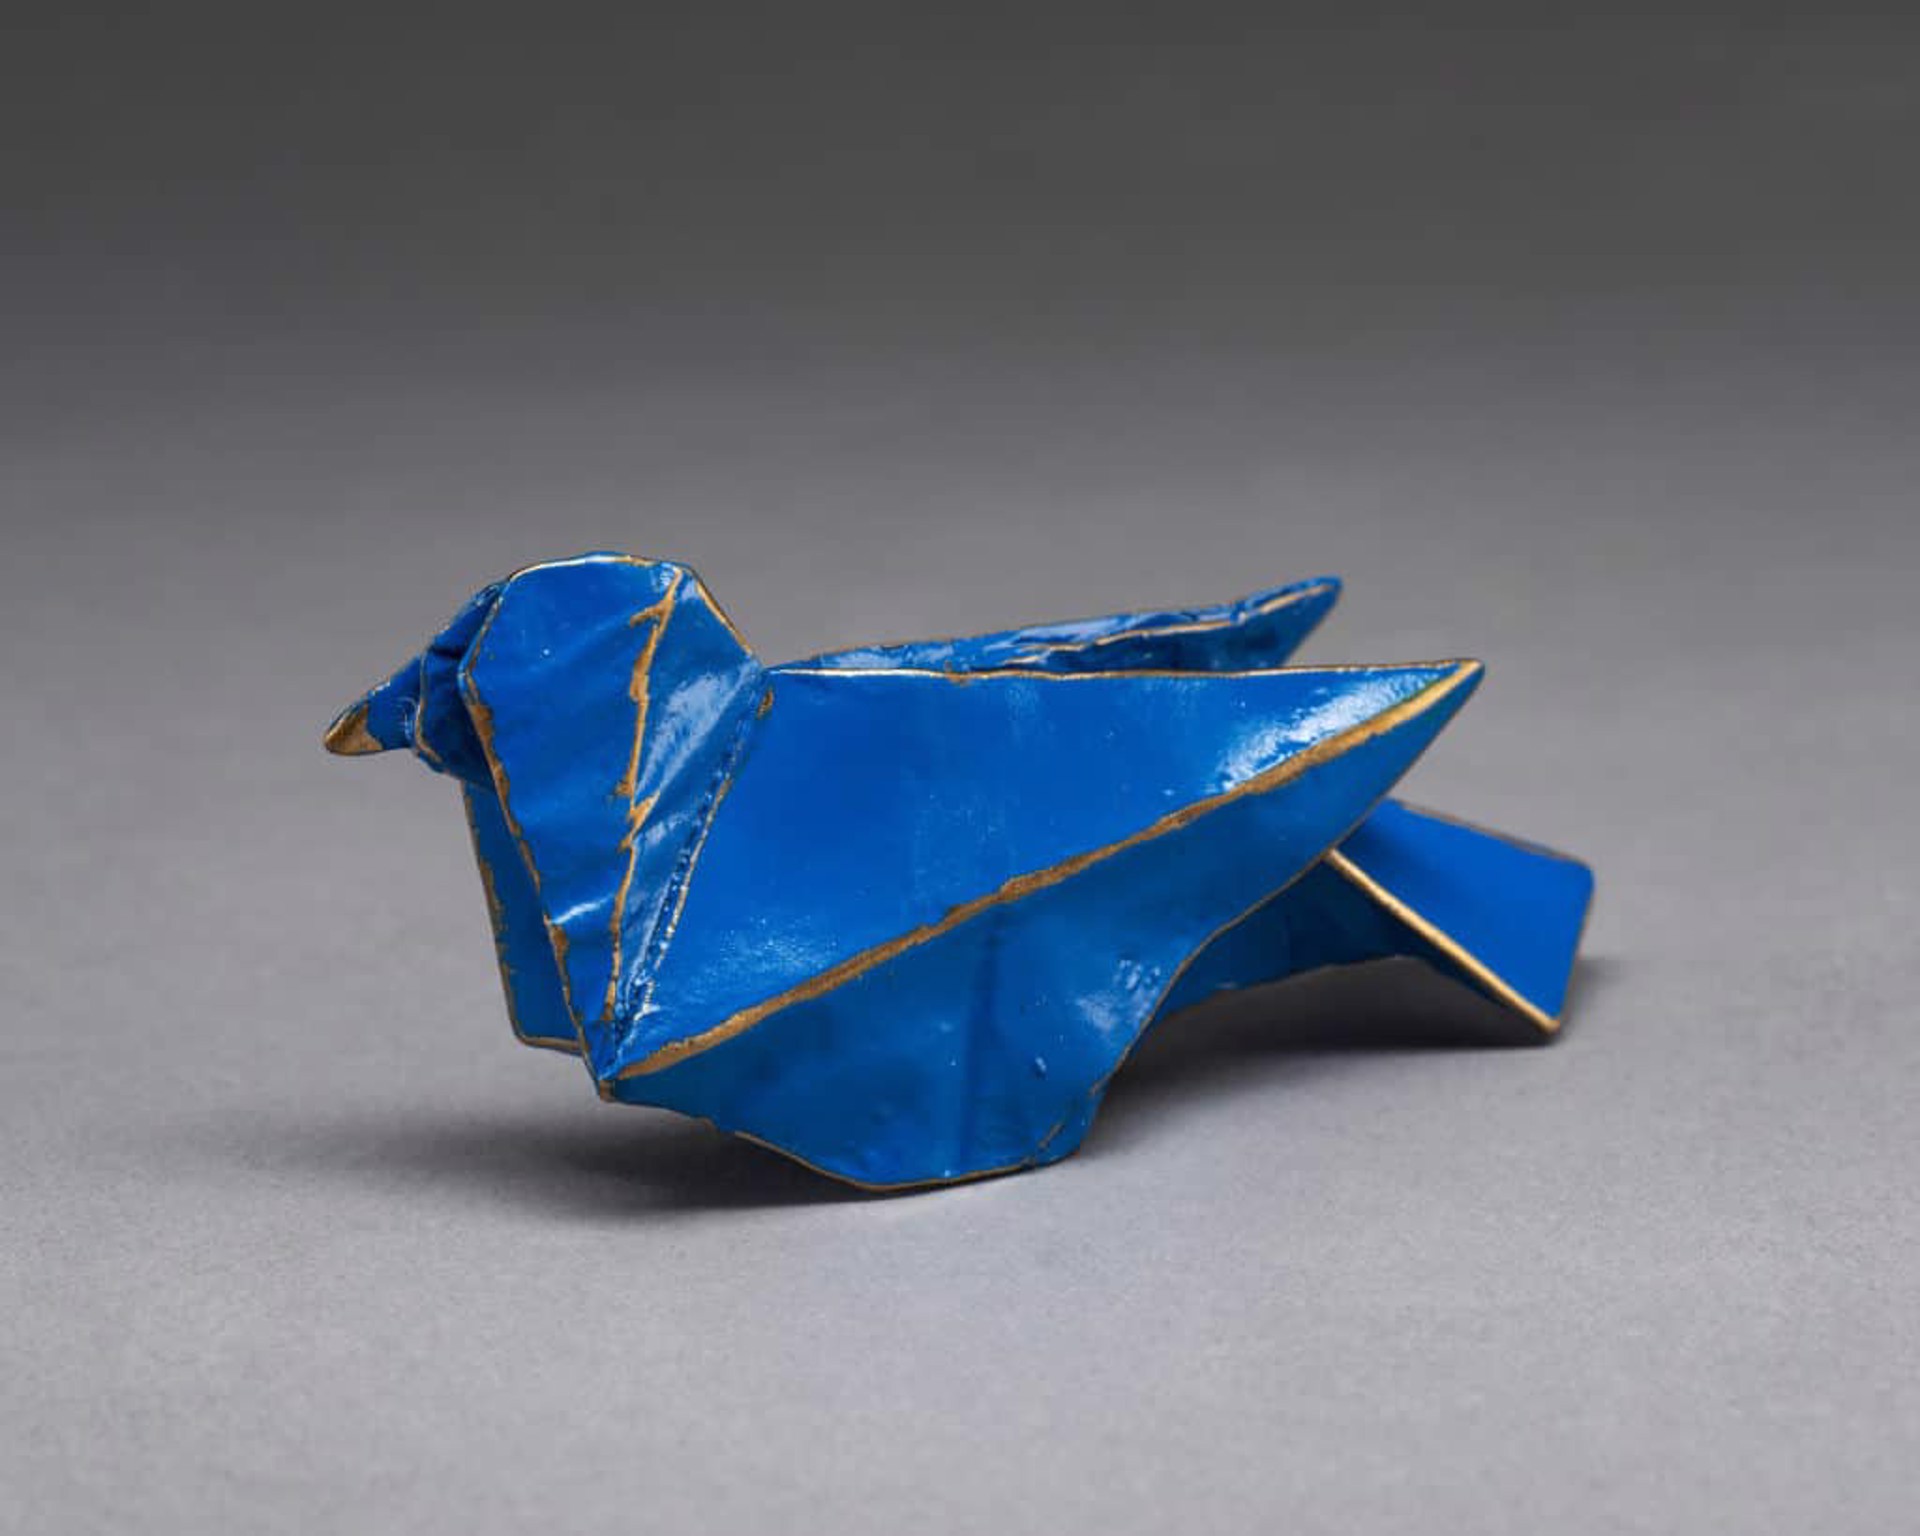 Blue Bird (collaboration with Robert J. Lang) by KEVIN BOX